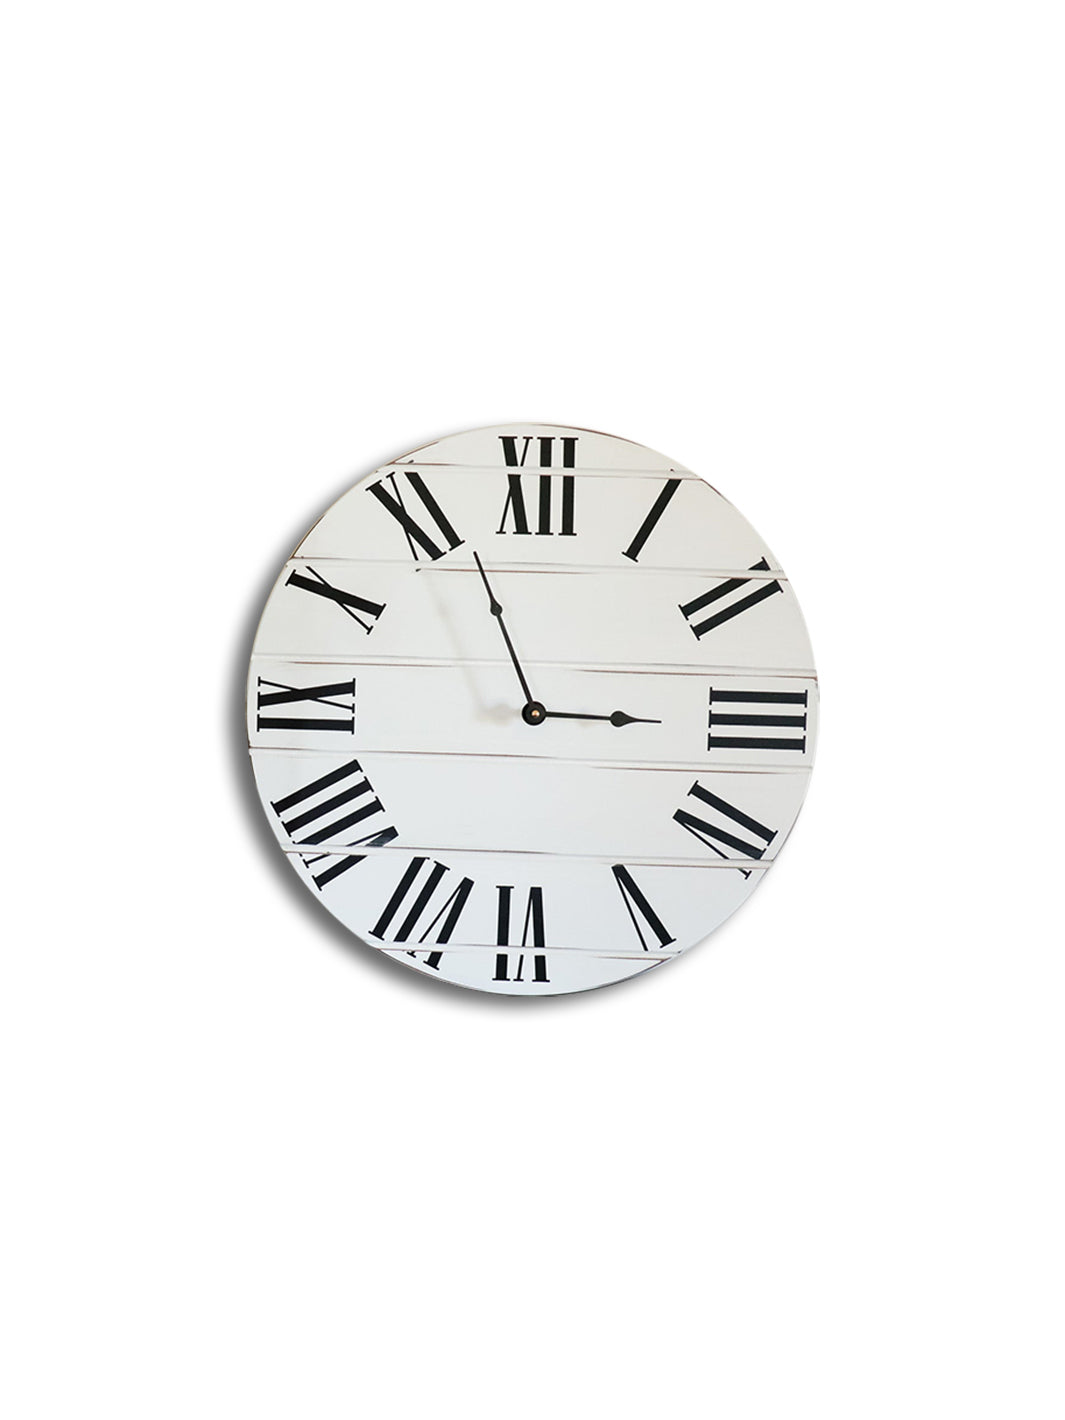 Simple White Lightly Distressed Large Wall Clock with Black Roman Numerals (in stock) Earthly Comfort Clocks 1126